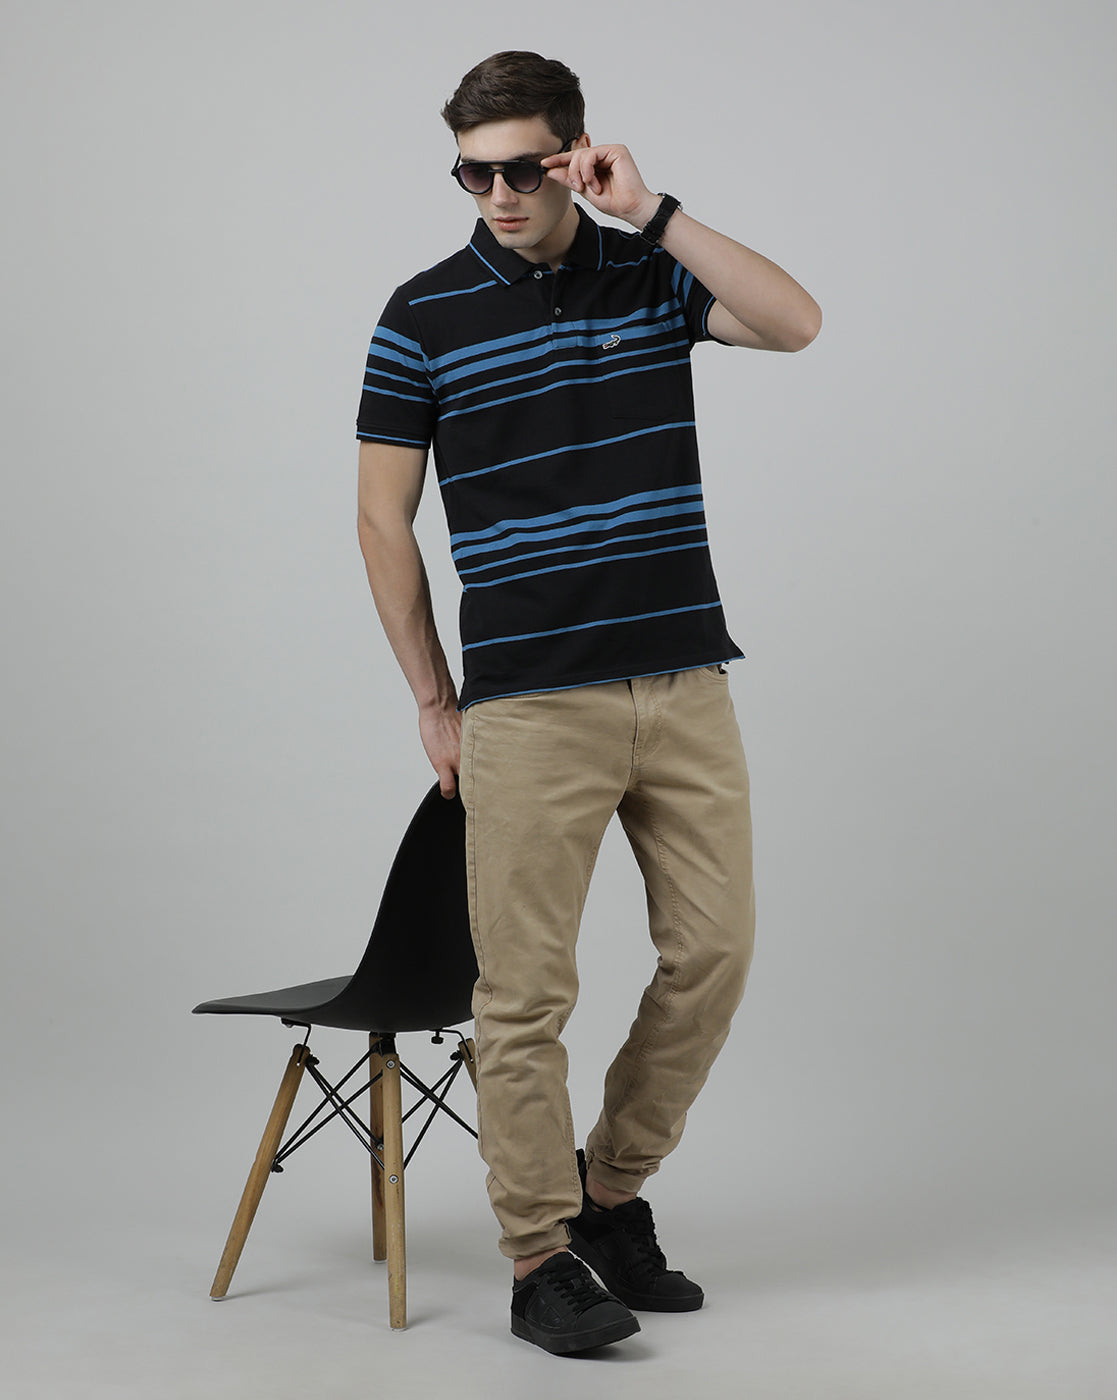 Casual Black T-Shirt Half Sleeve Slim Fit with Collar for Men